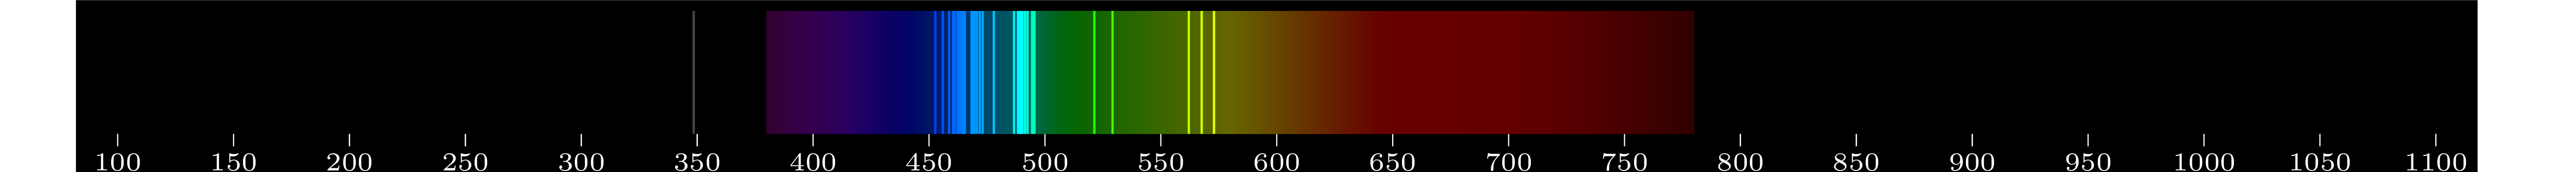 emmision spectra of element Nd